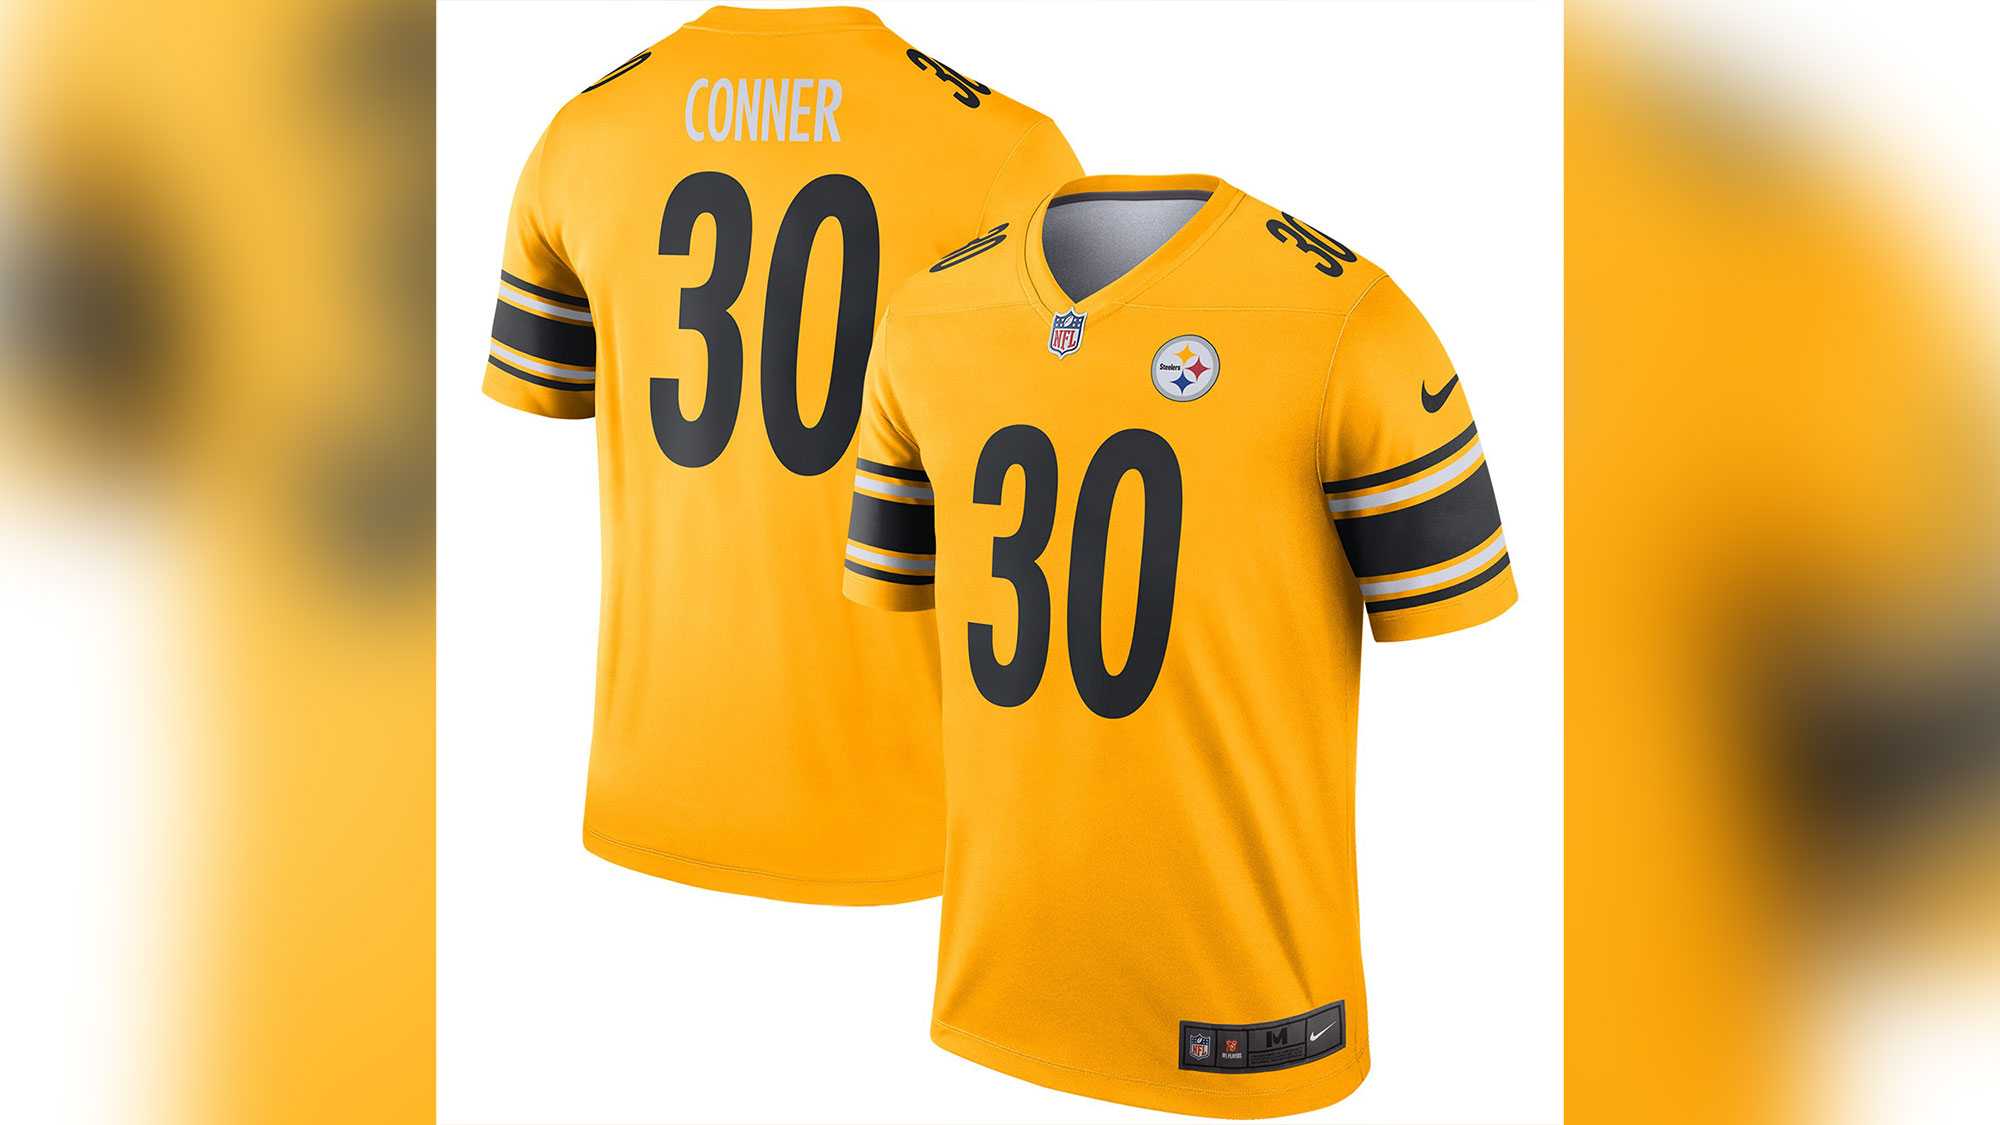 PITTSBURGH STEELERS: NFL unveils new 